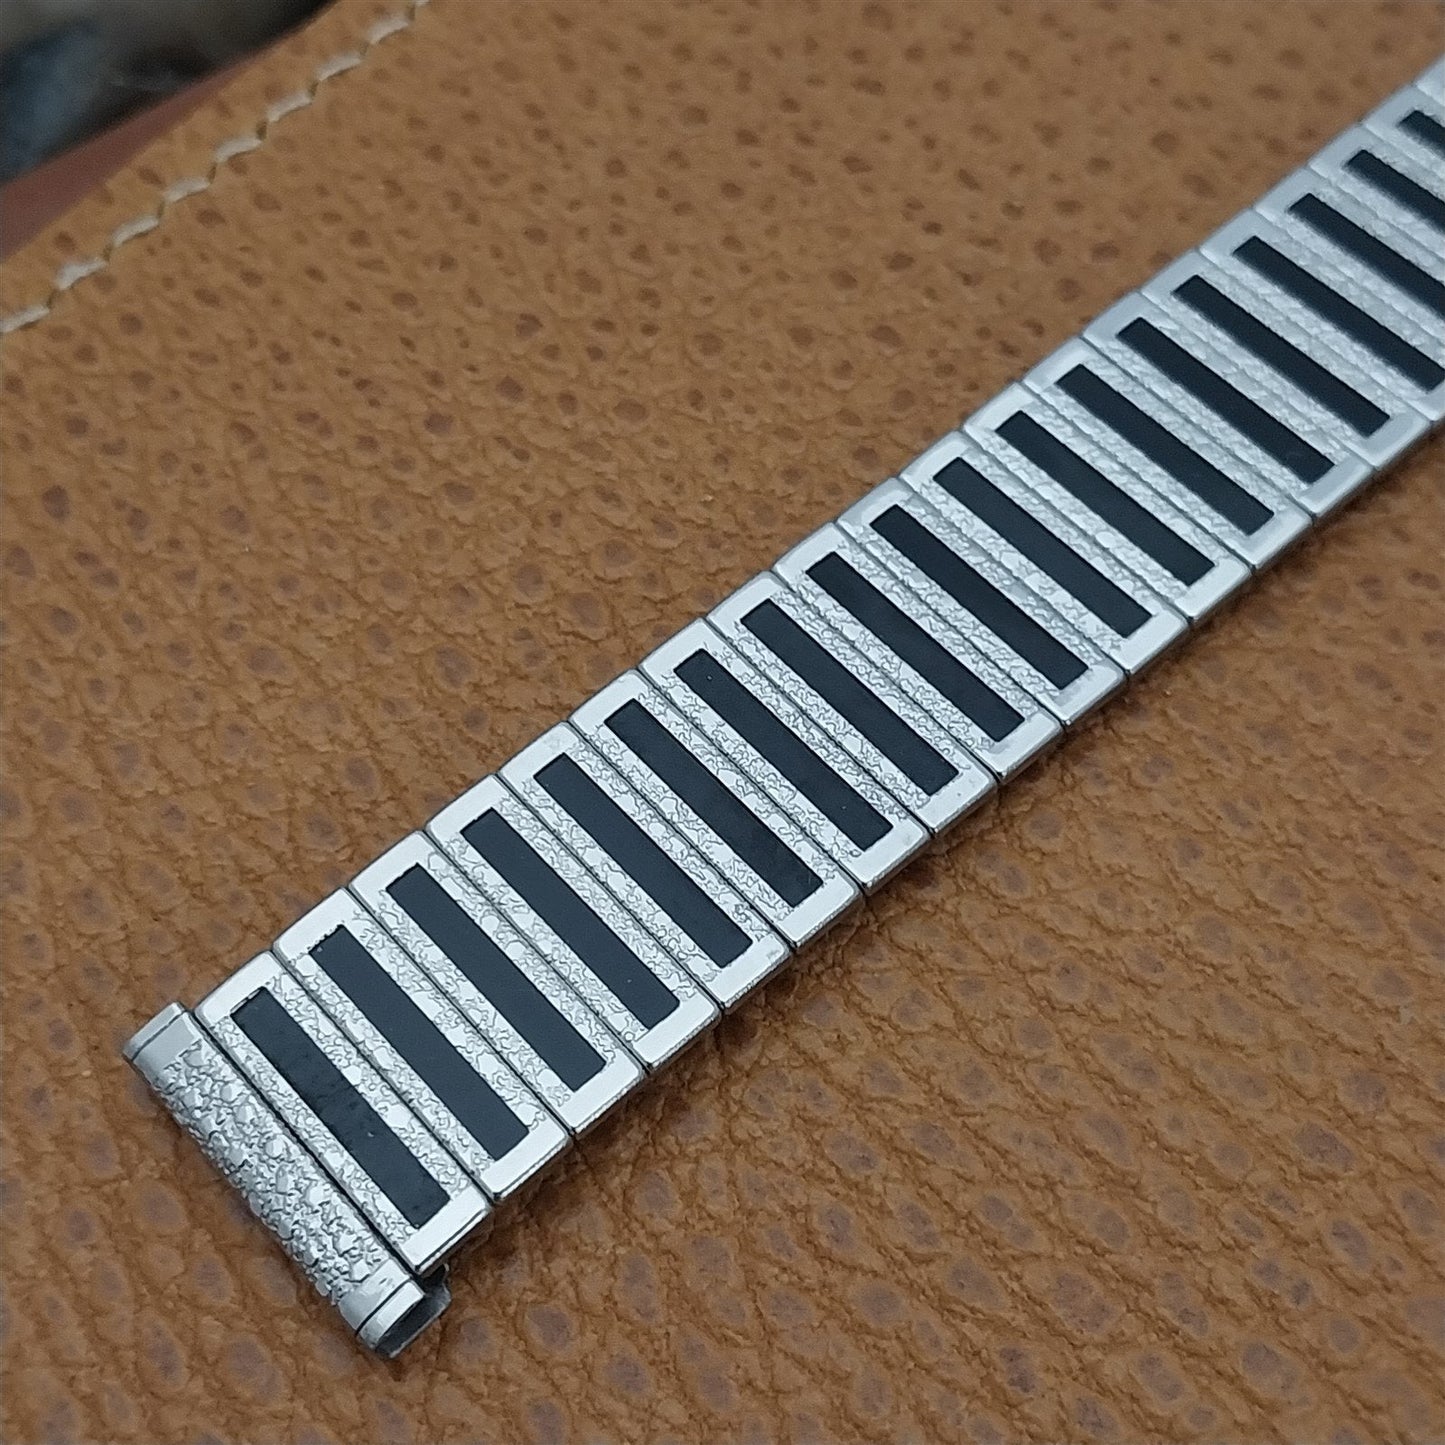 17.2mm Uniflex Stainless Steel & Black Expansion 1960s Vintage Watch Band